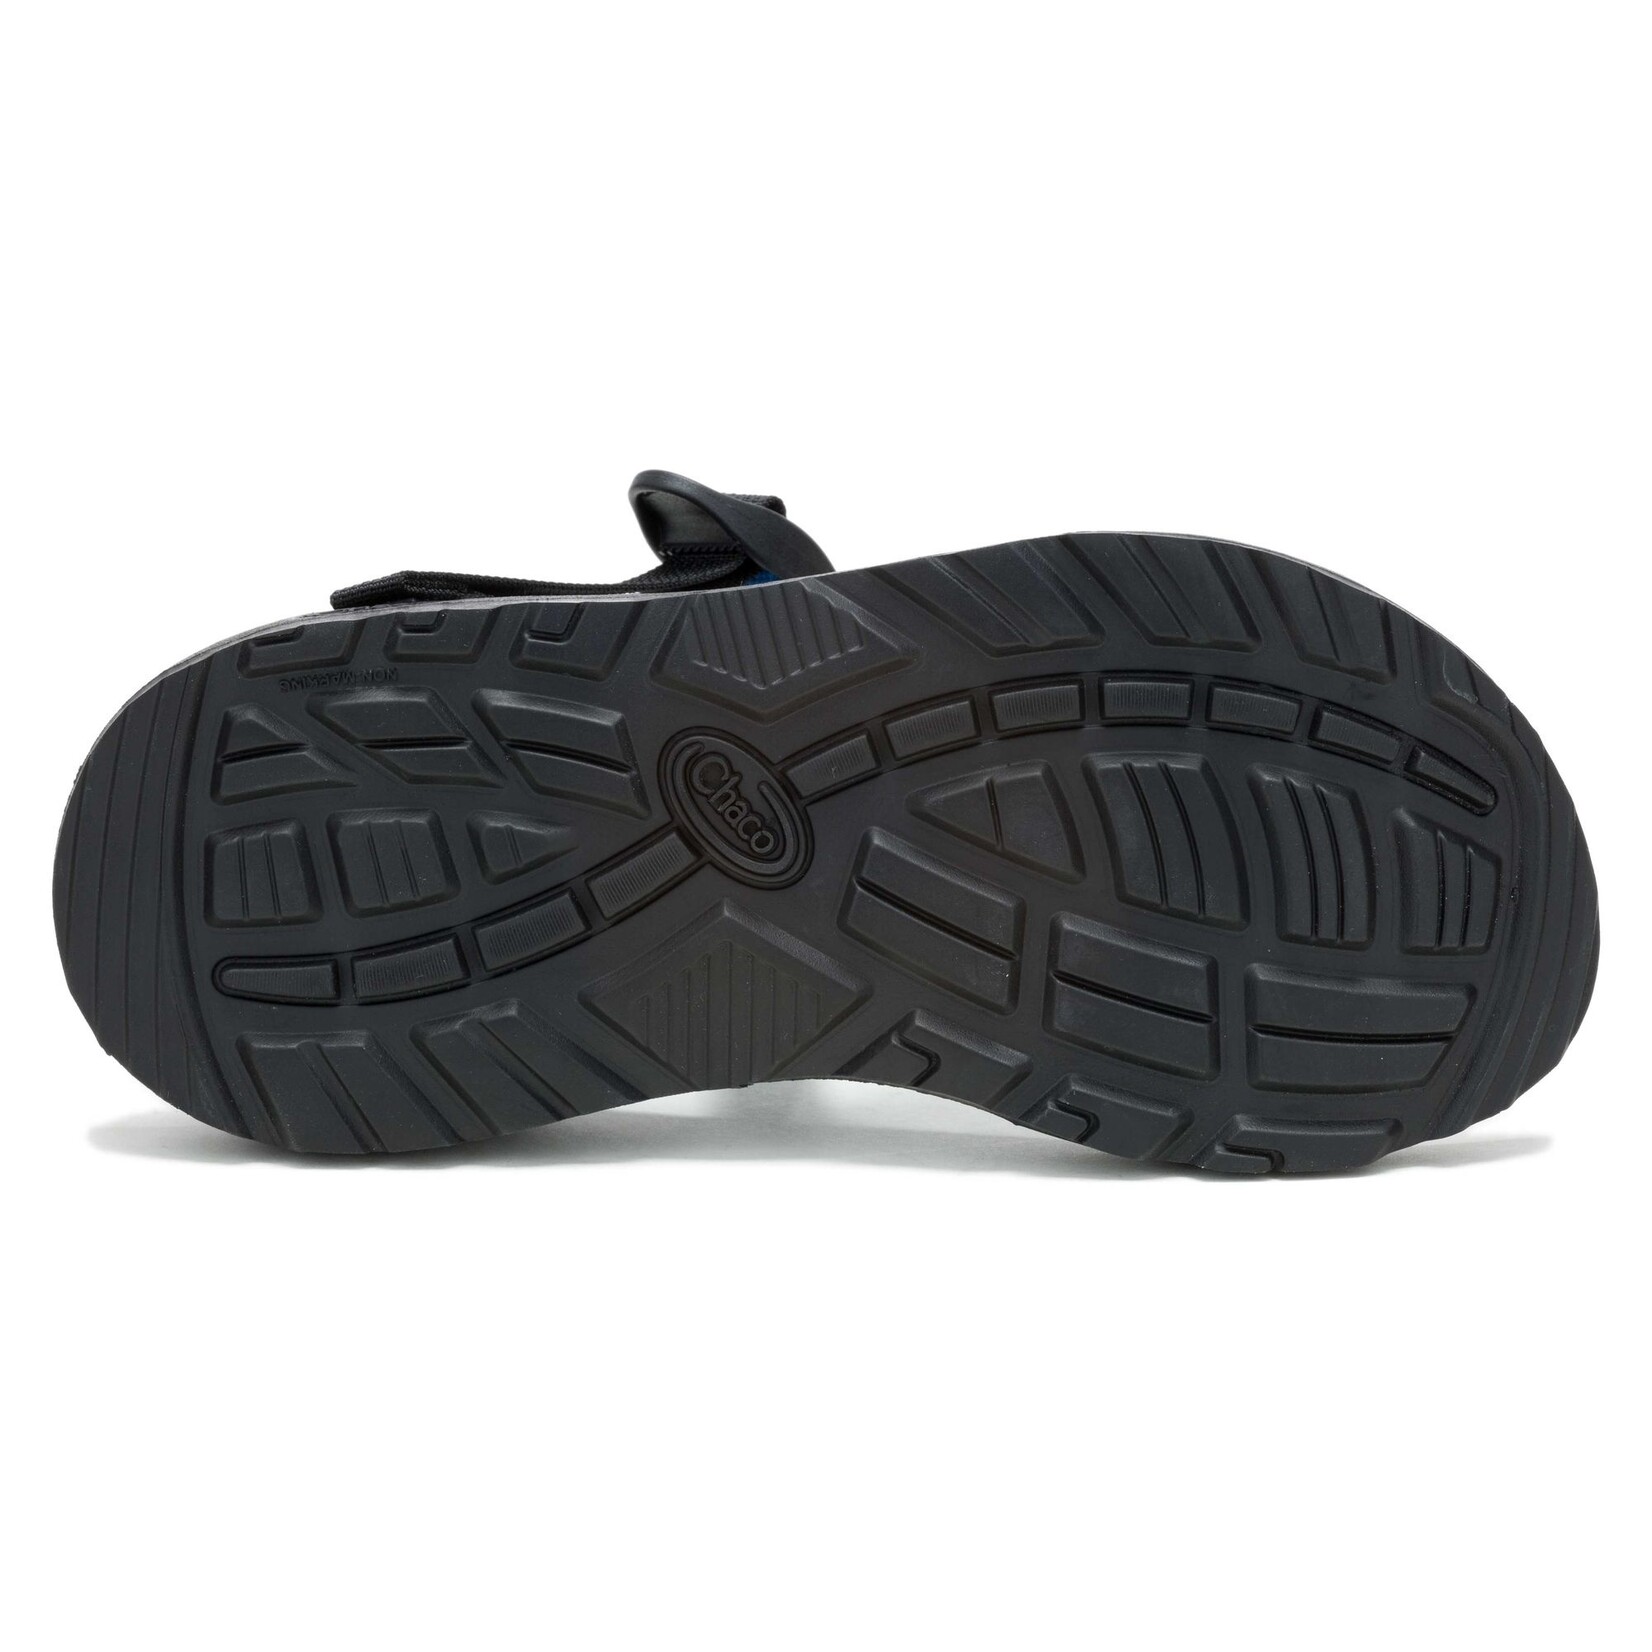 Chaco NRS + Chaco Women's Z/1 Classic Sandals